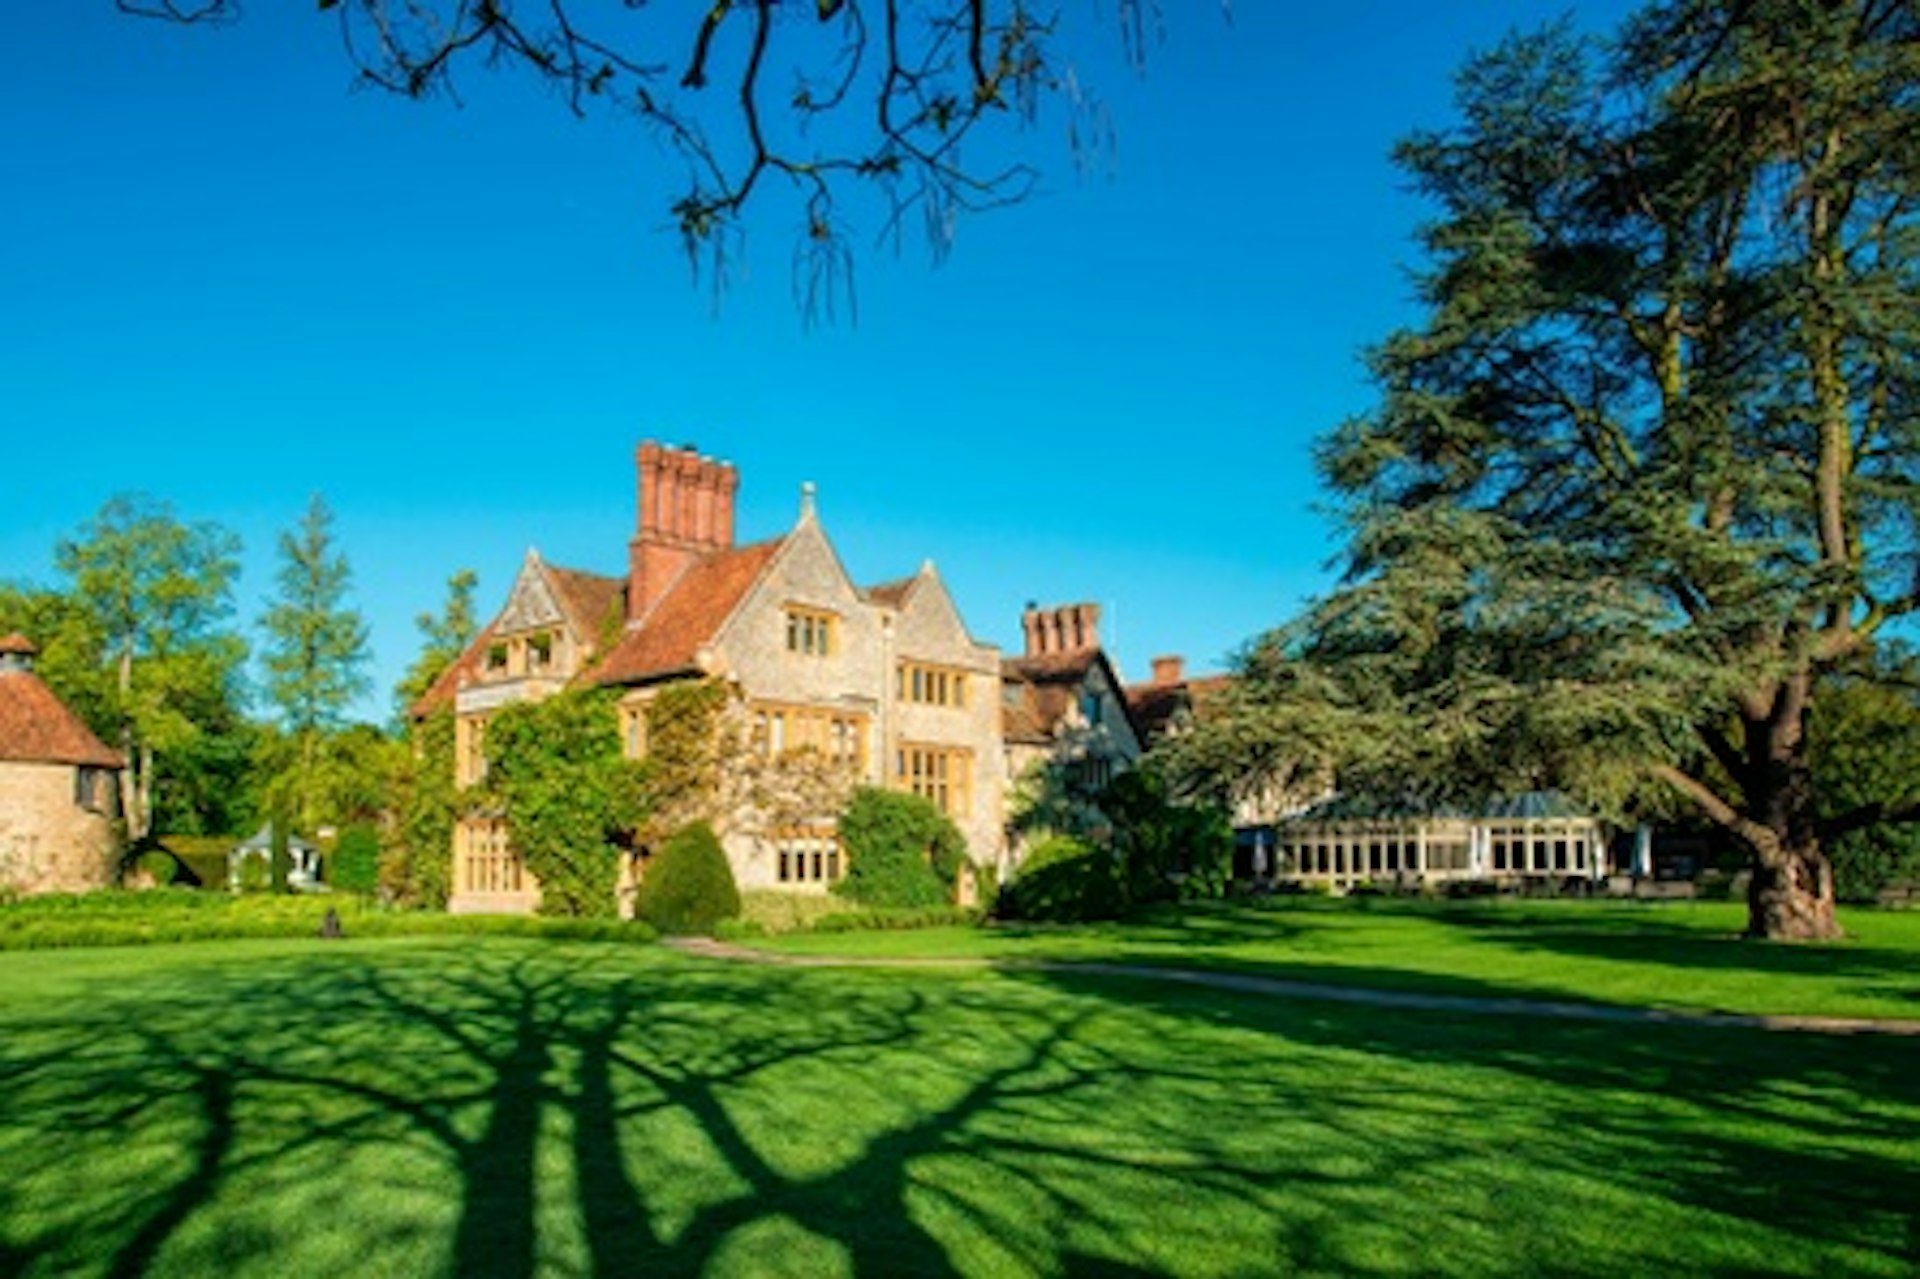 One Day Course at the Raymond Blanc Cookery School at Belmond Le Manoir 1